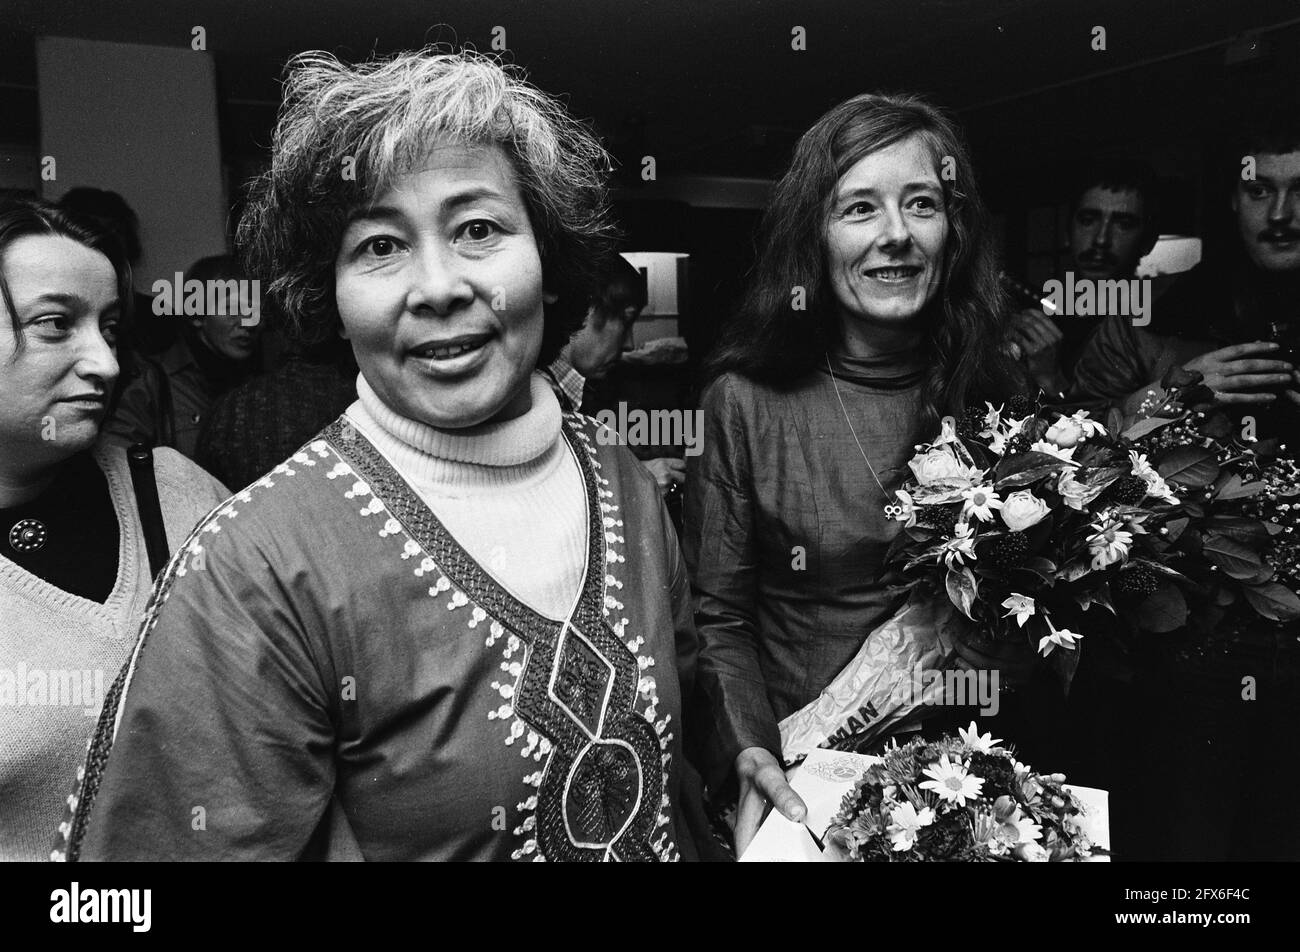 Hetty Romein-Verschoor (l) and Joke Smit, November 30, 1979, award ceremonies, women's emancipation, The Netherlands, 20th century press agency photo, news to remember, documentary, historic photography 1945-1990, visual stories, human history of the Twentieth Century, capturing moments in time Stock Photo